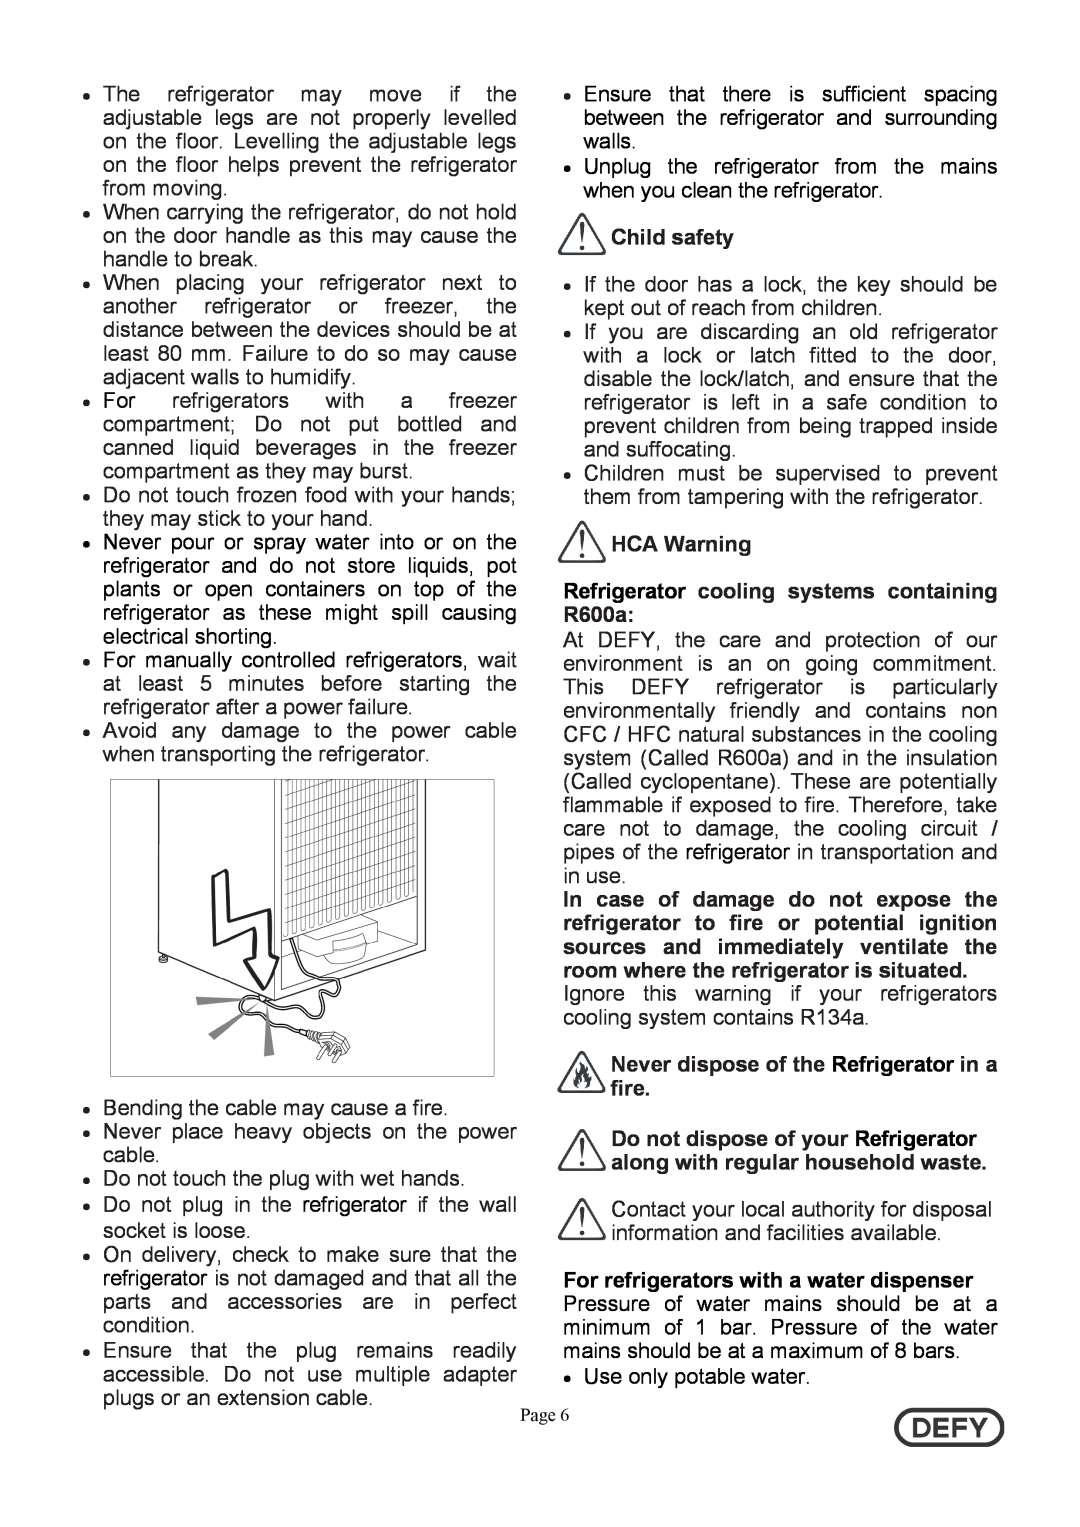 Defy Appliances DFD442 instruction manual Child safety, HCA Warning, Refrigerator cooling systems containing R600a 